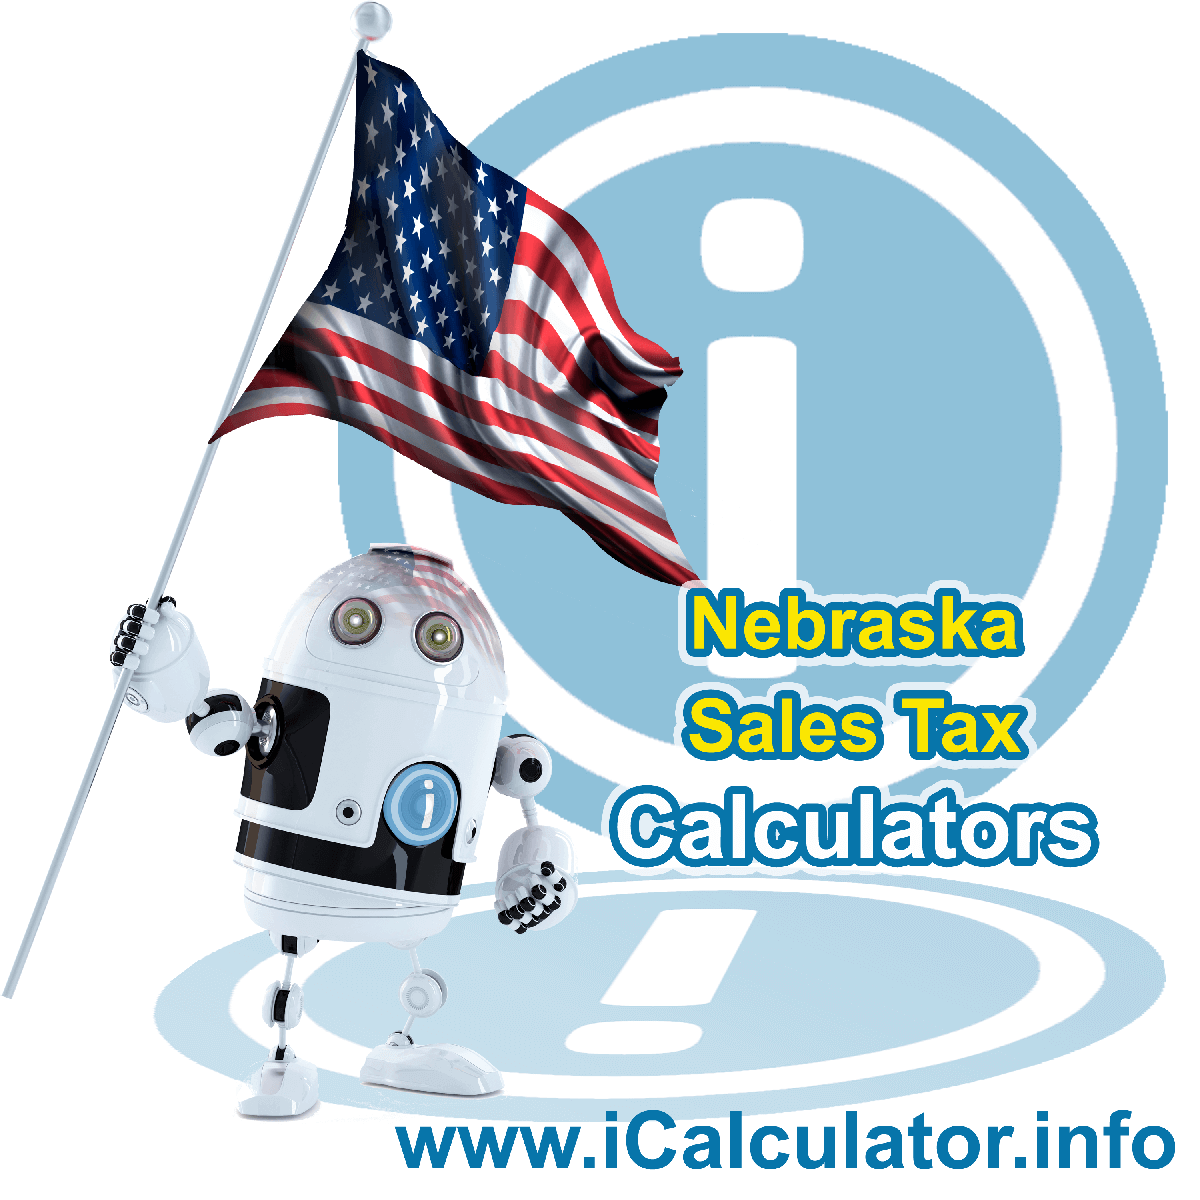 Norfolk Sales Rates: This image illustrates a calculator robot calculating Norfolk sales tax manually using the Norfolk Sales Tax Formula. You can use this information to calculate Norfolk Sales Tax manually or use the Norfolk Sales Tax Calculator to calculate sales tax online.